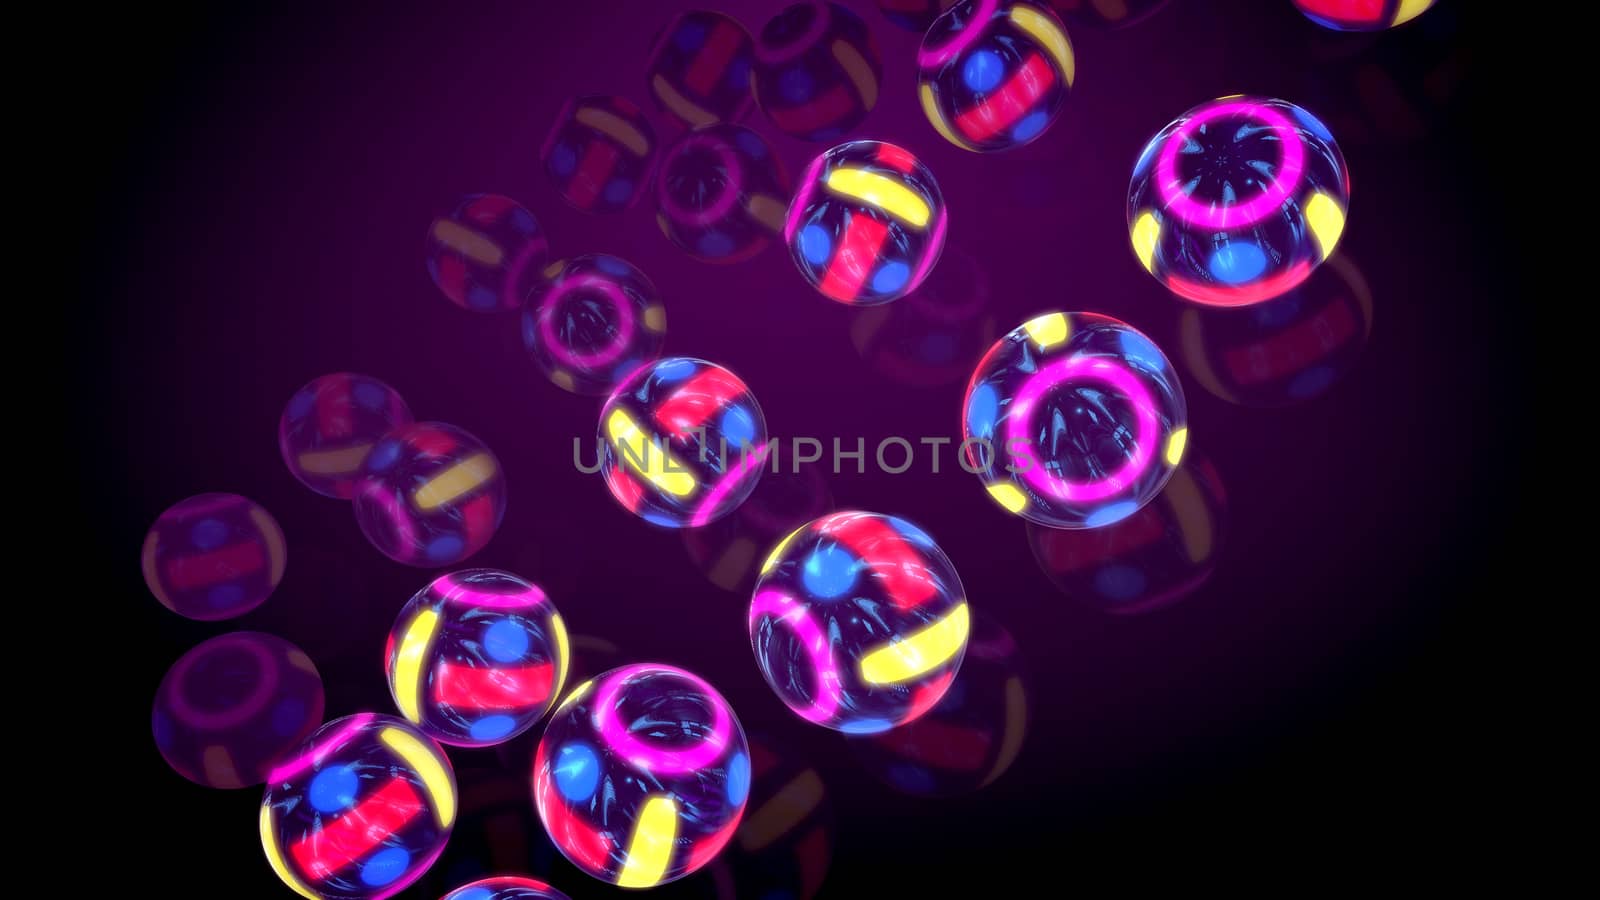 Amazing 3d illustration of four lines of neon looking colorful balls sliding down on a flat surface put aslant in the pink background. They generate the spirit of novelty, optimism and celebration.